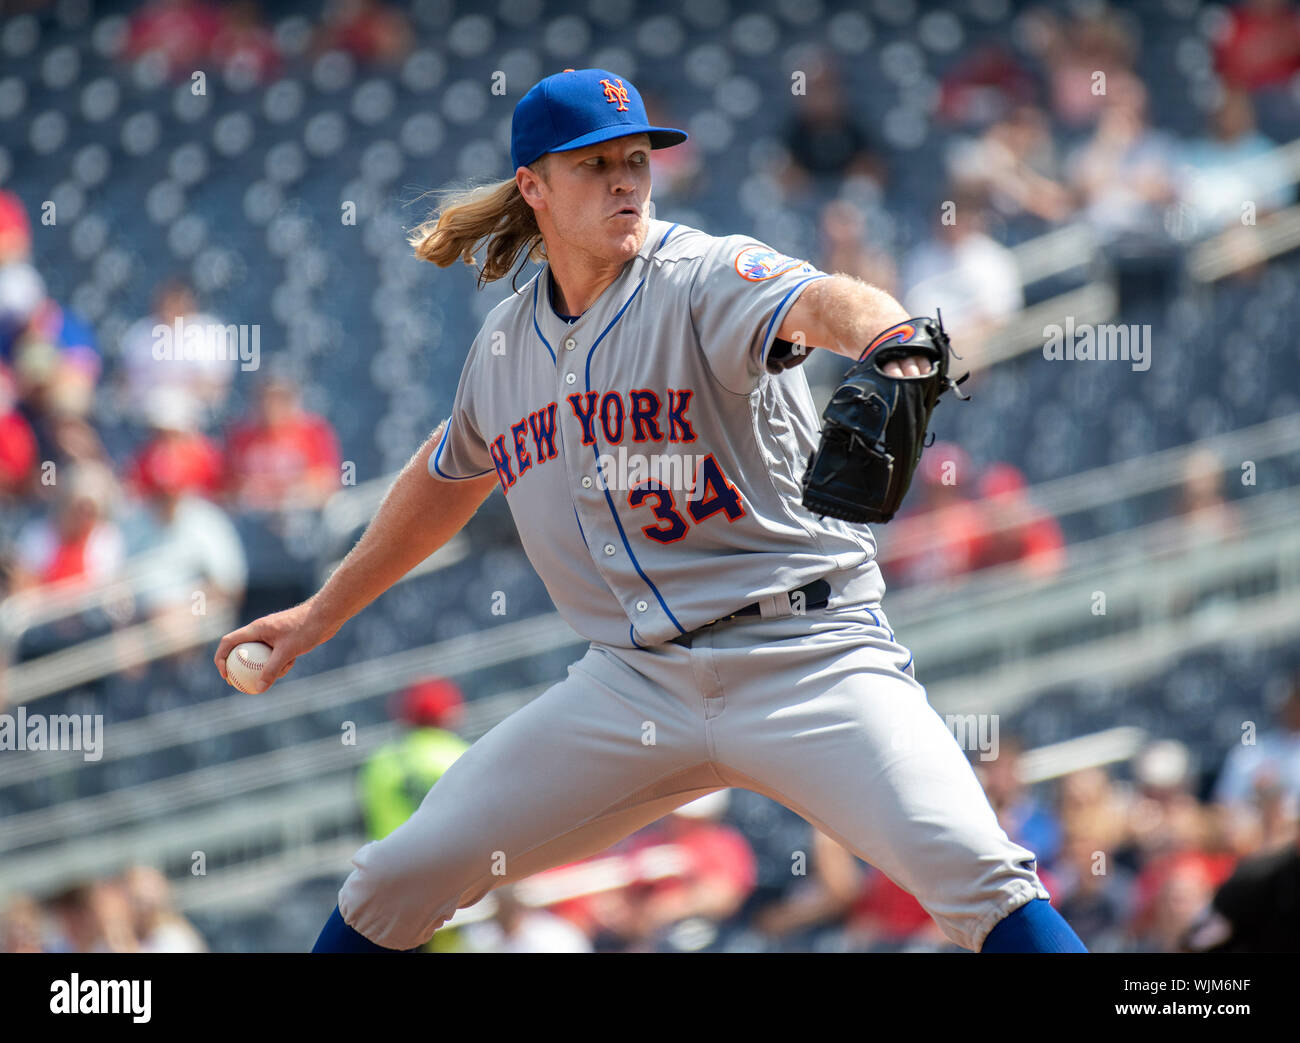 Washington, United States Of America. 02nd Sep, 2019. New York Mets starting pitcher Noah Syndergaard (34) works in the first inning against the Washington Nationals at Nationals Park in Washington, DC on Monday, September 2, 2019.Credit: Ron Sachs/CNP (RESTRICTION: NO New York or New Jersey Newspapers or newspapers within a 75 mile radius of New York City) | usage worldwide Credit: dpa/Alamy Live News Stock Photo